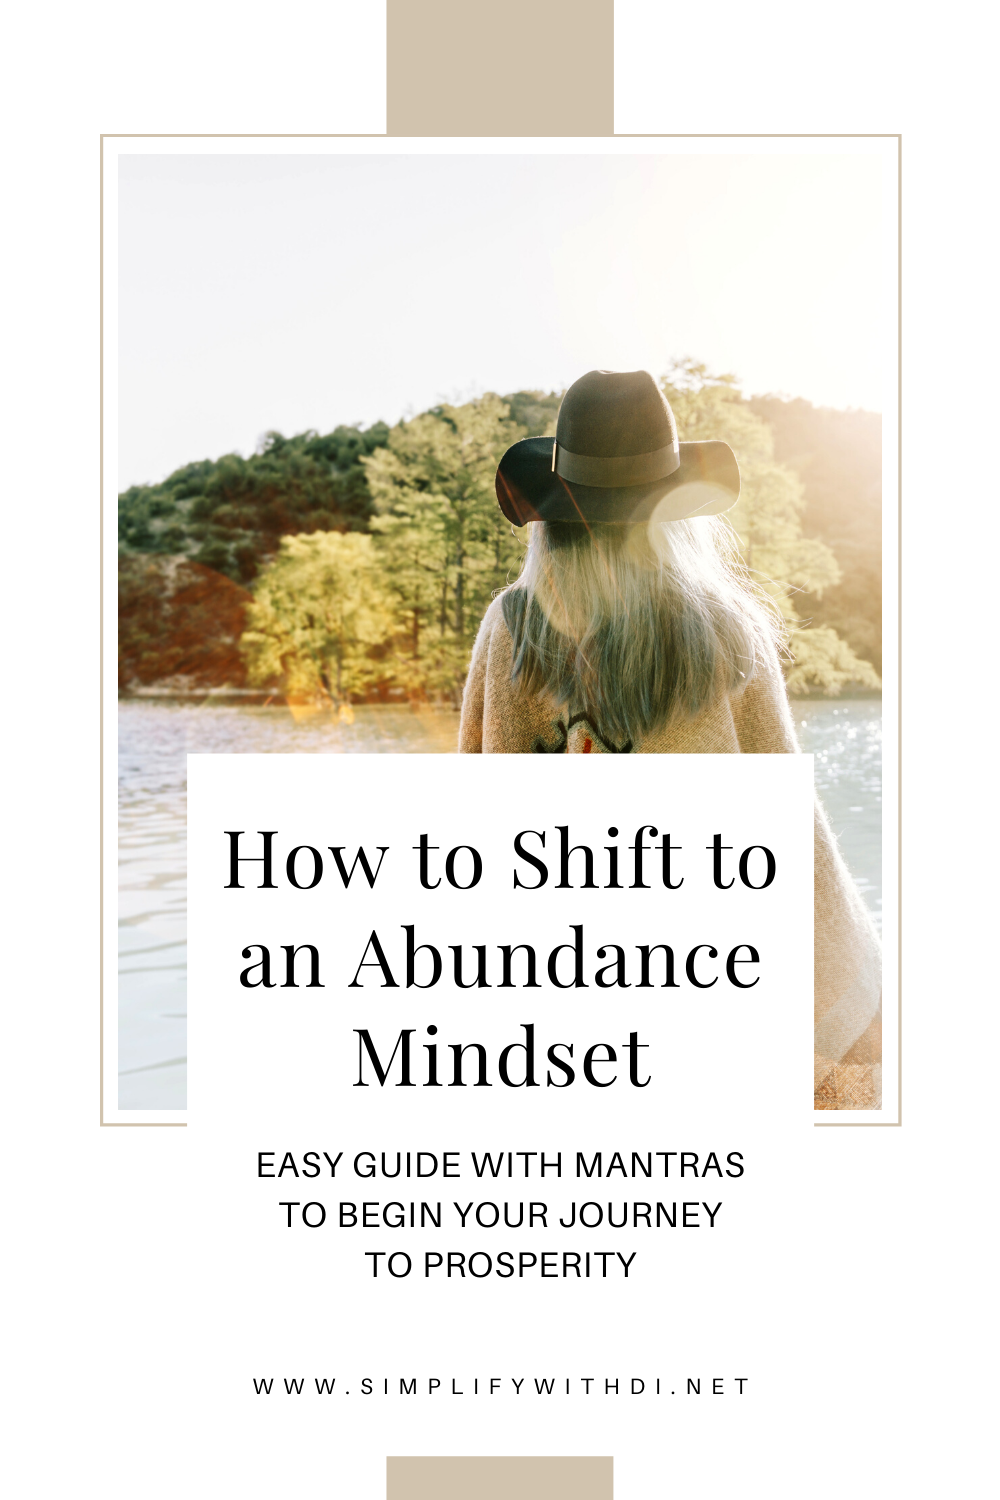 A begginer's guide to shifting to an abundance mindset. This guide has hacks that will change your life and change help you transform our of a scarcity mindset. You'll find mantras and affirmations to attract wealth, prosperity, and love in abundance. These mantras and other tips will help you create habits and routines that will help you cultivate an abundance mindset. Whether you need an abundance of money, success, love or relationships, these positive exercises will help you create a routine which you find your life overflowing, filling you with gratitude.